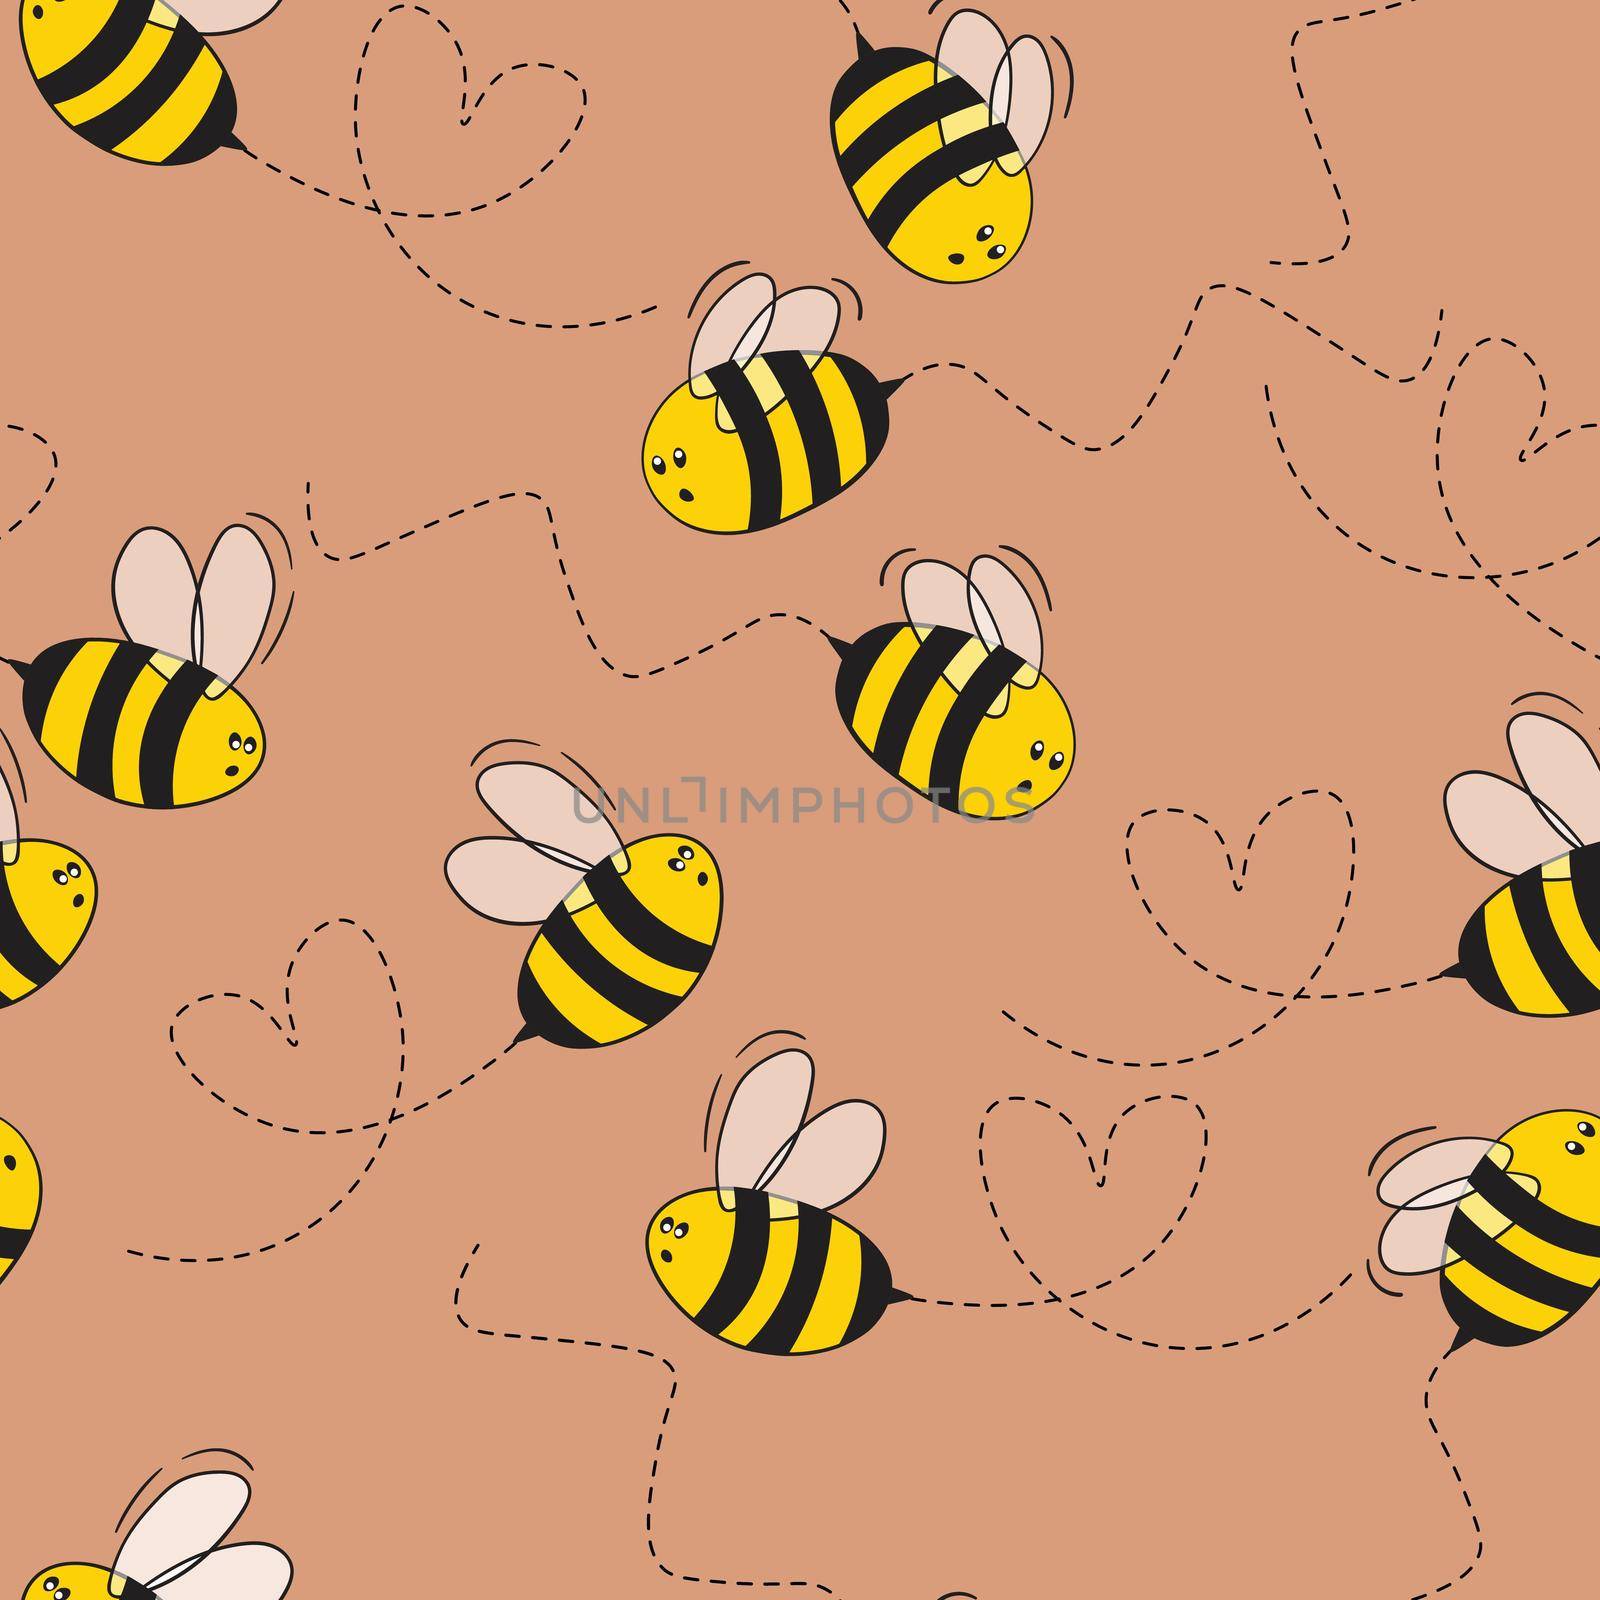 Seamless pattern with bees on color background. Small wasp. Vector illustration. Adorable cartoon character. Template design for invitation, cards, textile, fabric. Doodle style.